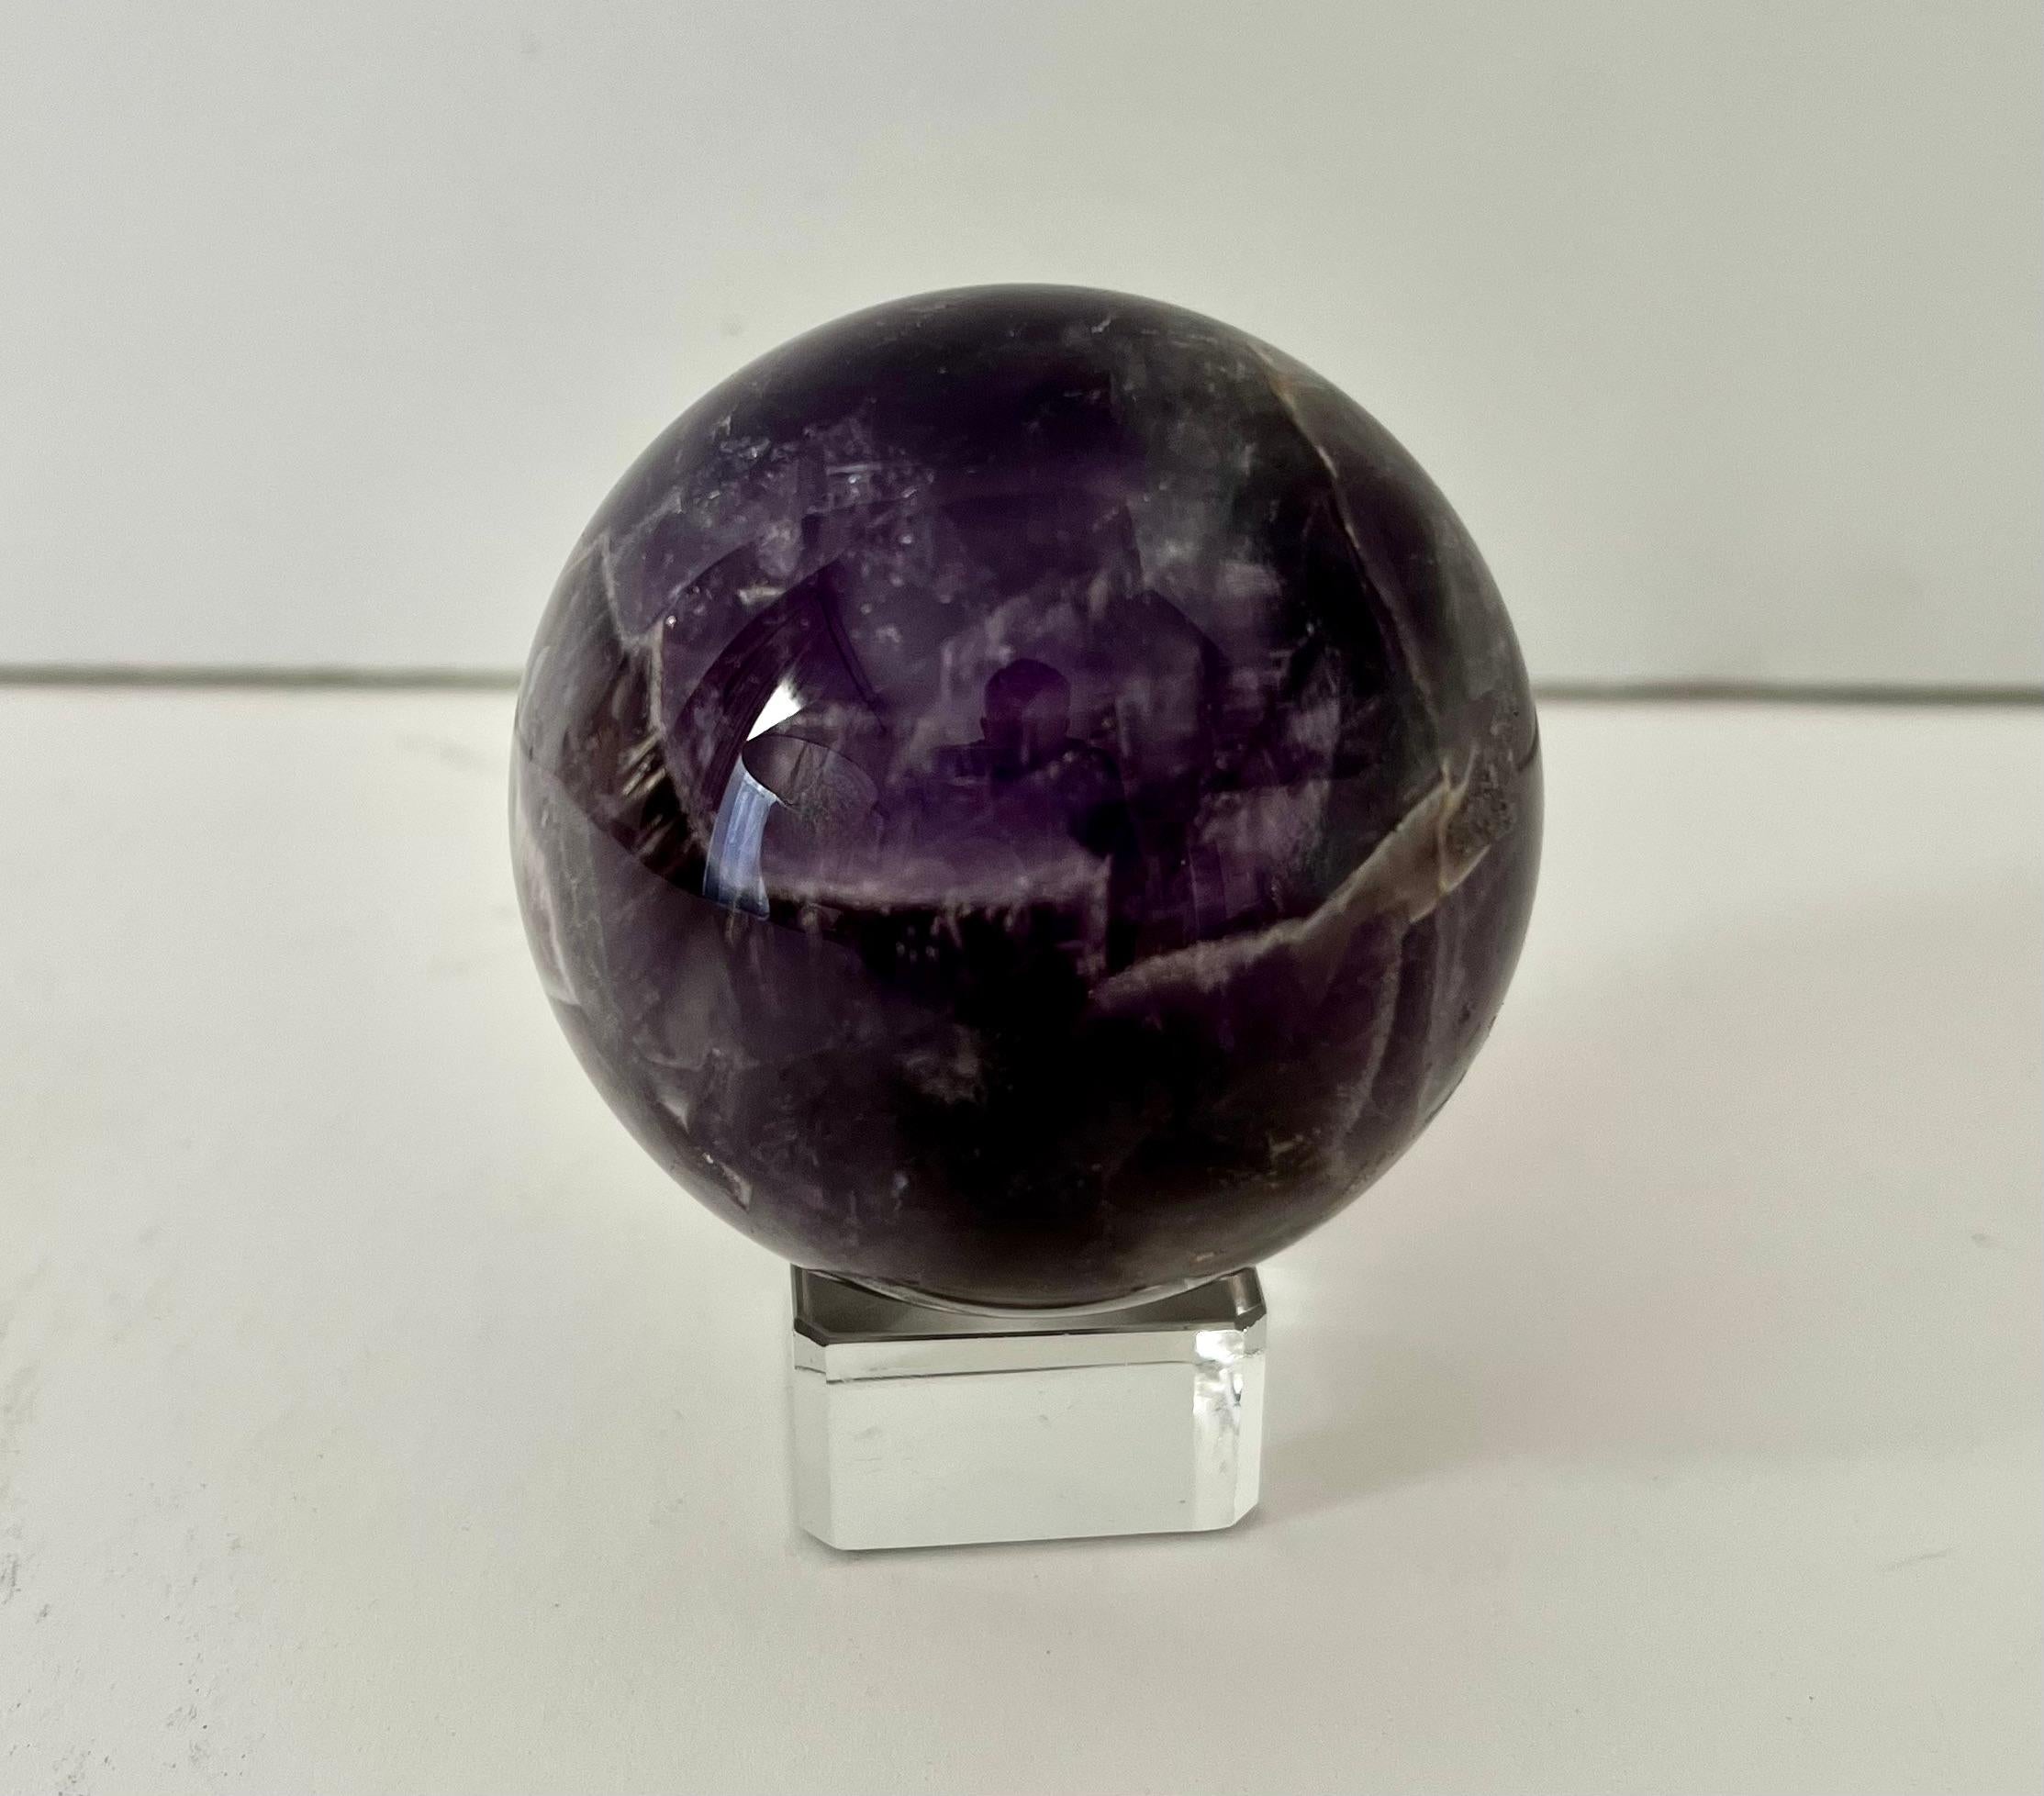 A small paperweight on a square crystal stand with a divot to hold the sphere. A compliment to any desk or work station or on a cocktail table. A beautiful piece.